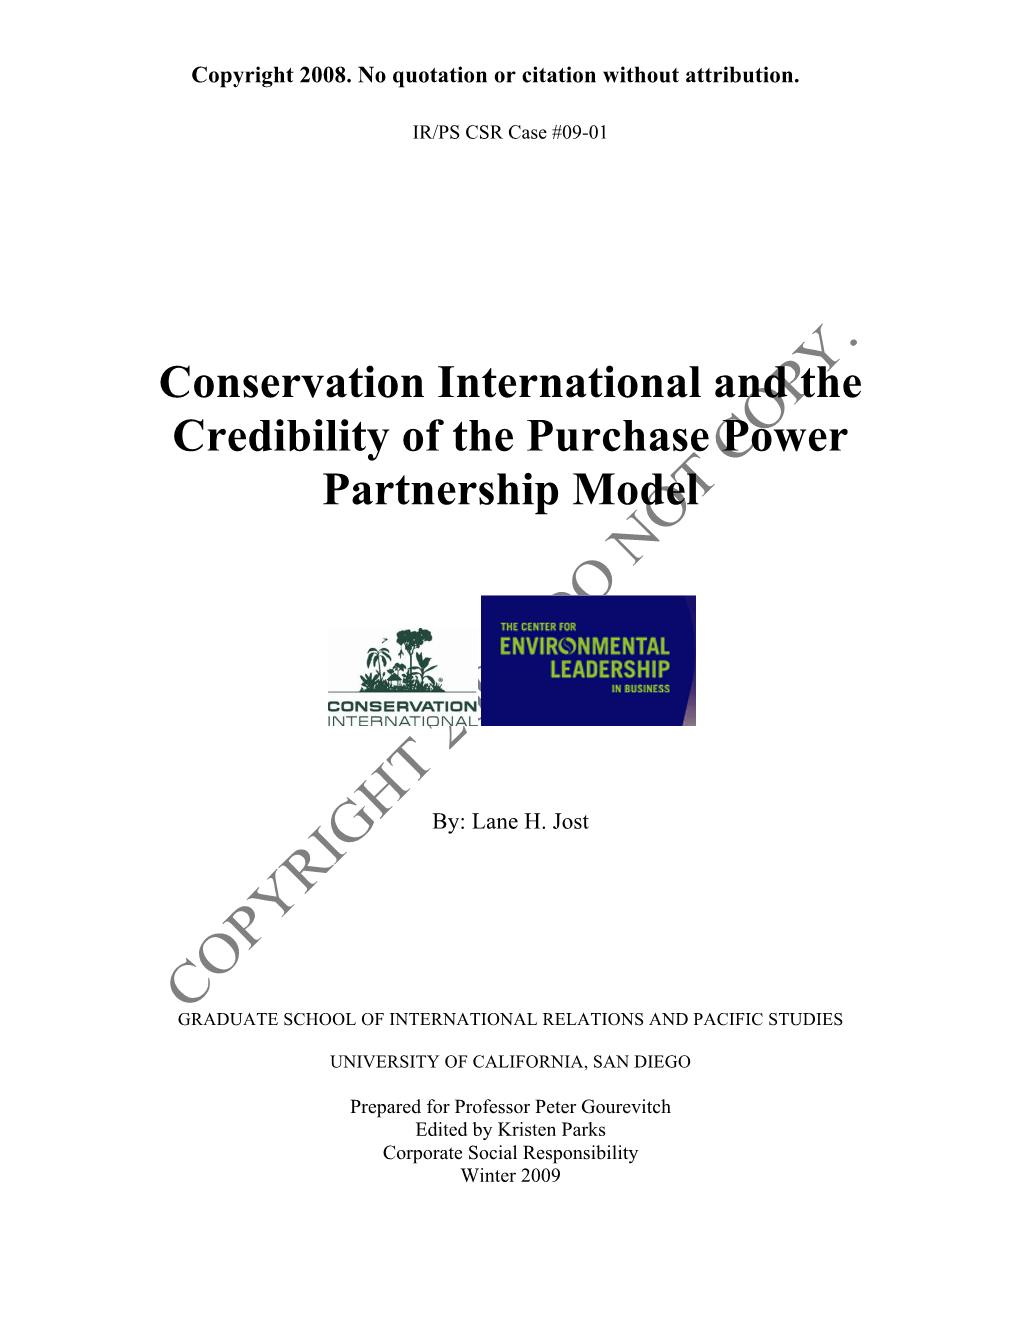 Conservation International and the Credibility of the Purchase Power Partnership Model